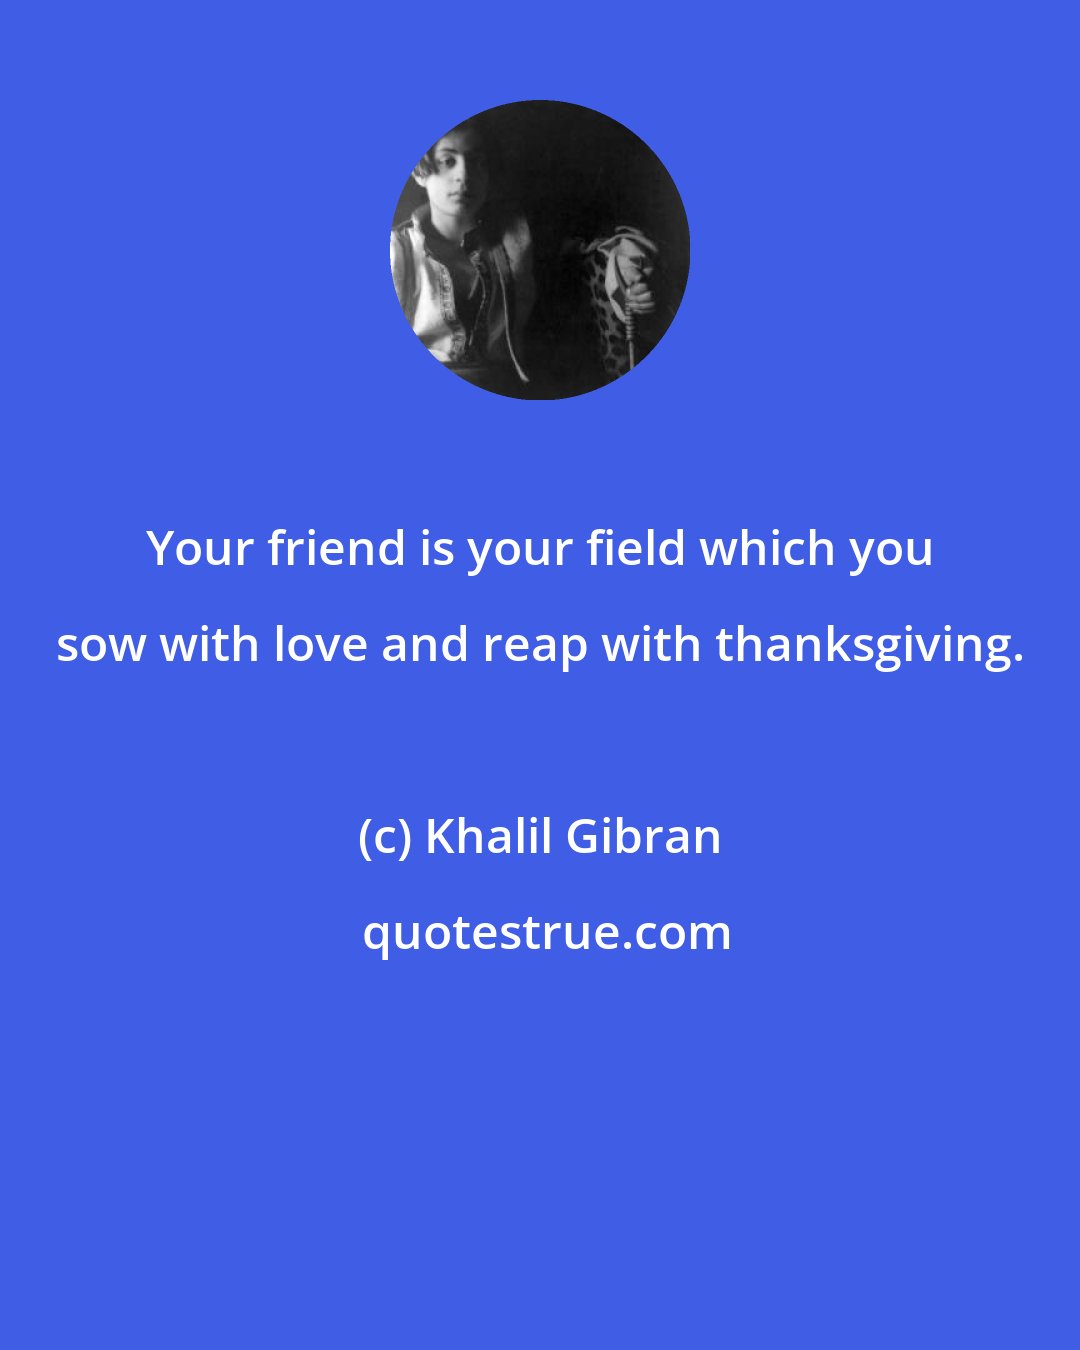 Khalil Gibran: Your friend is your field which you sow with love and reap with thanksgiving.